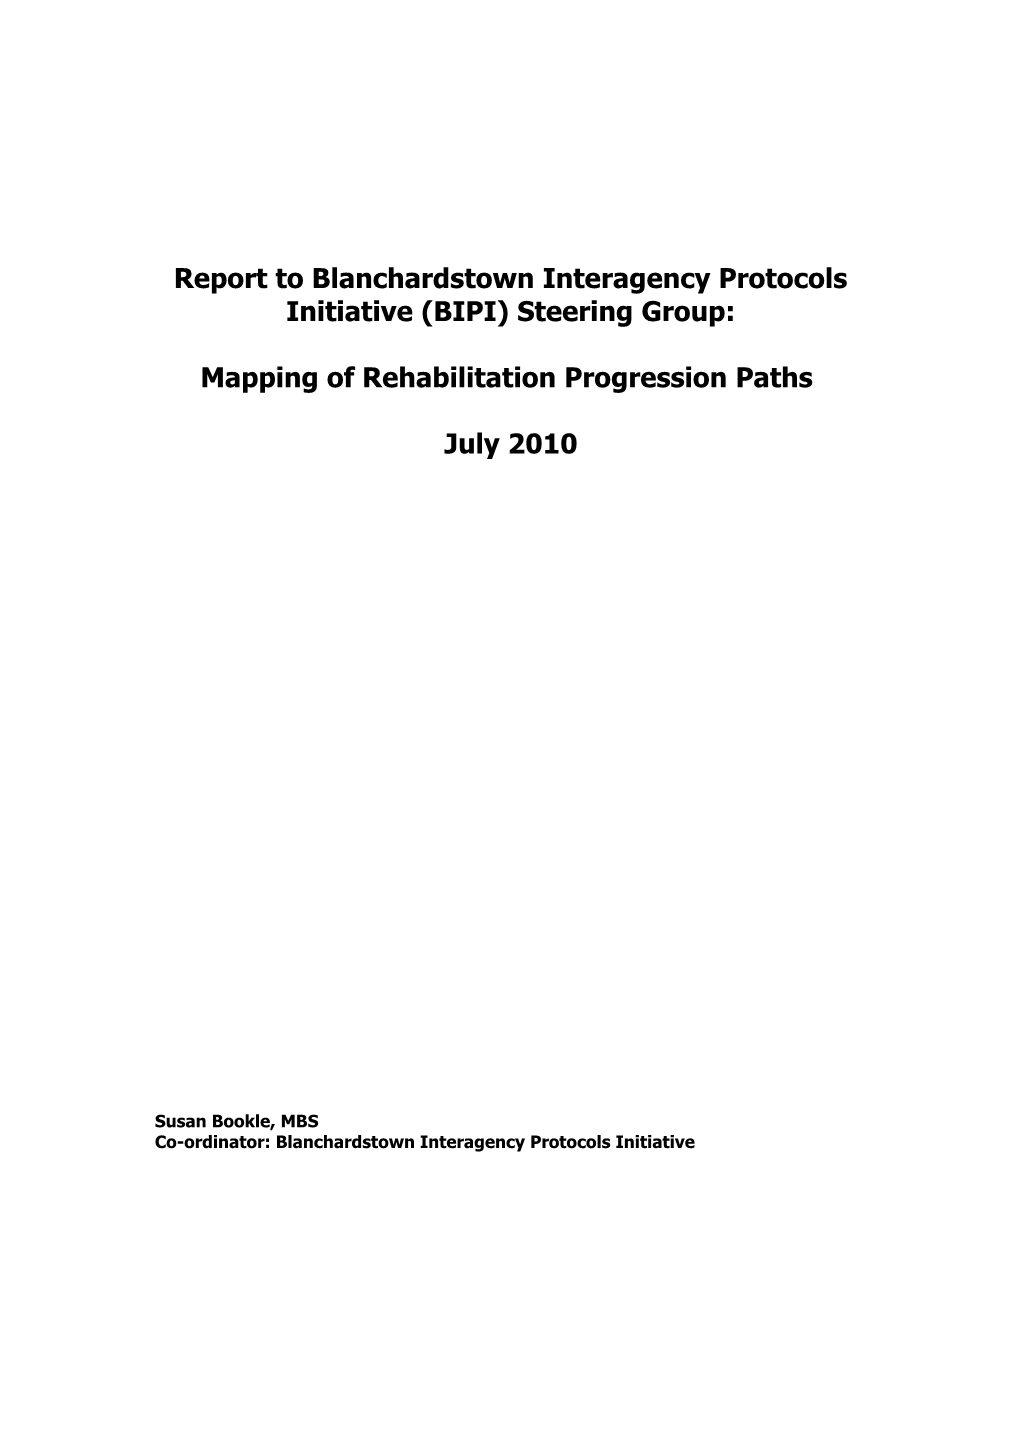 Report to Blanchardstown Interagency Protocols Initiative (BIPI) Steering Group